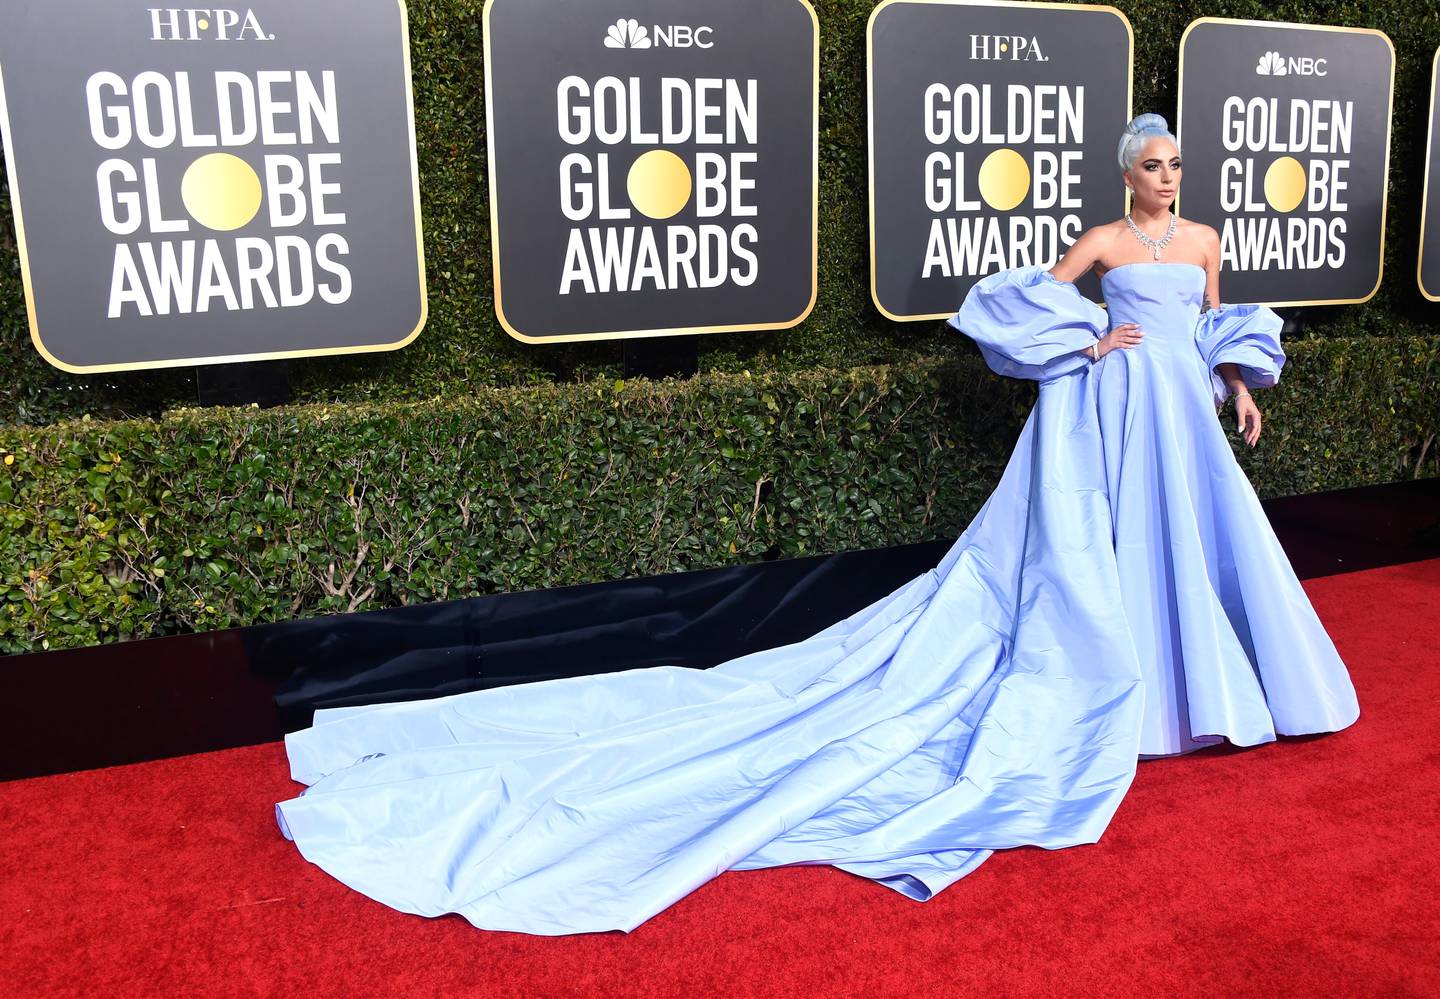 Lady Gaga attends the 76th Annual Golden Globe Awards wearing a Valentino periwinkle gown.